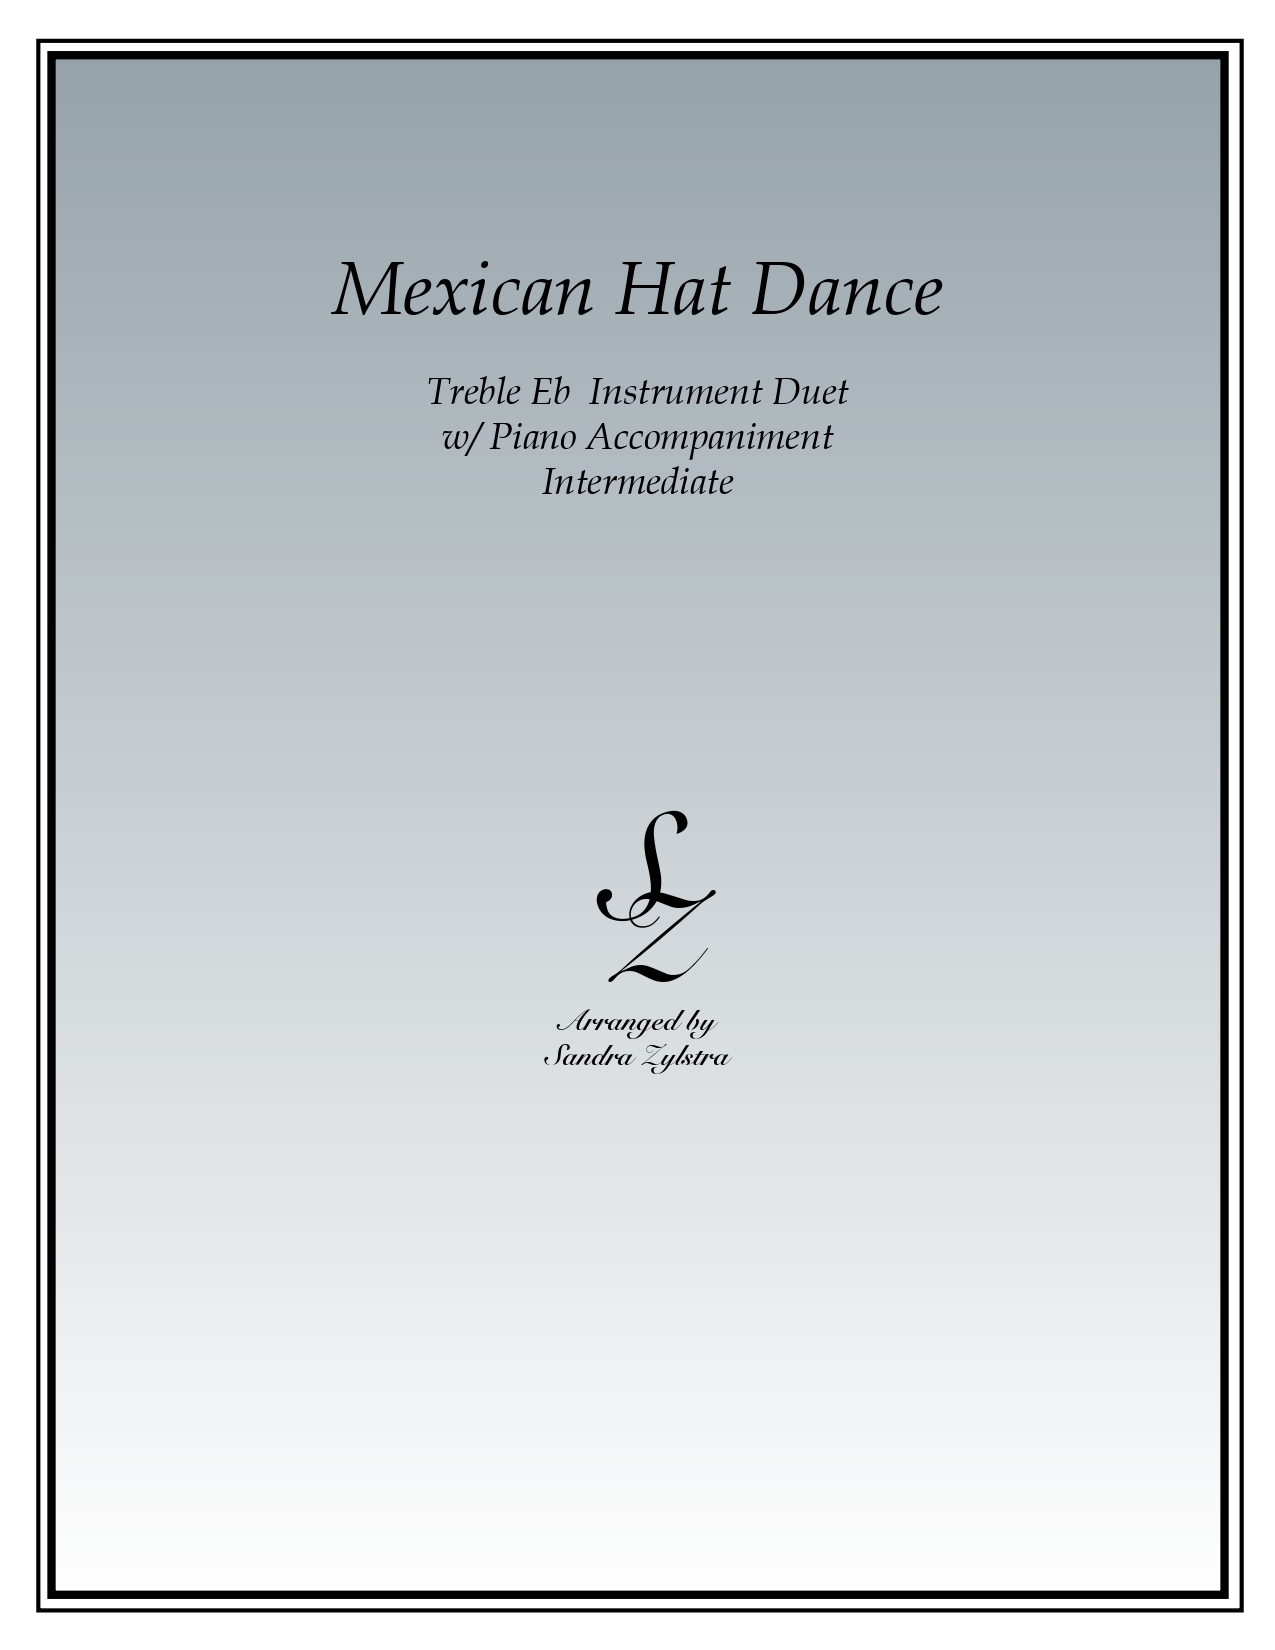 Mexican Hat Dance Eb instrument duet parts cover page 00011